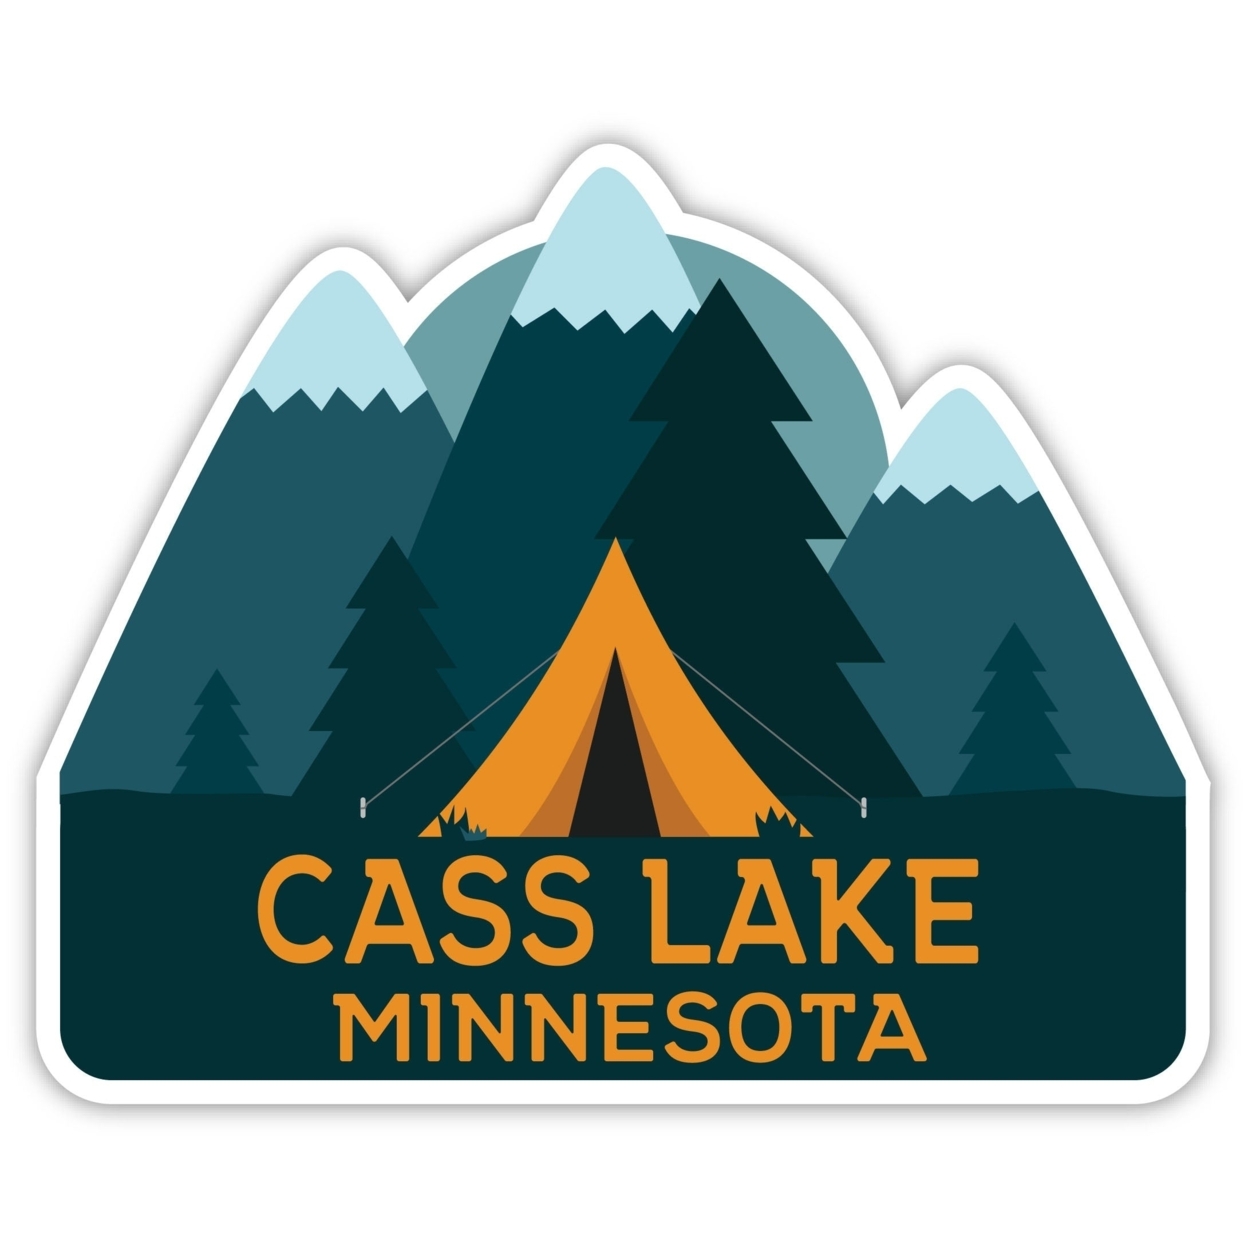 Cass Lake Minnesota Souvenir Decorative Stickers (Choose Theme And Size) - 4-Pack, 6-Inch, Great Outdoors